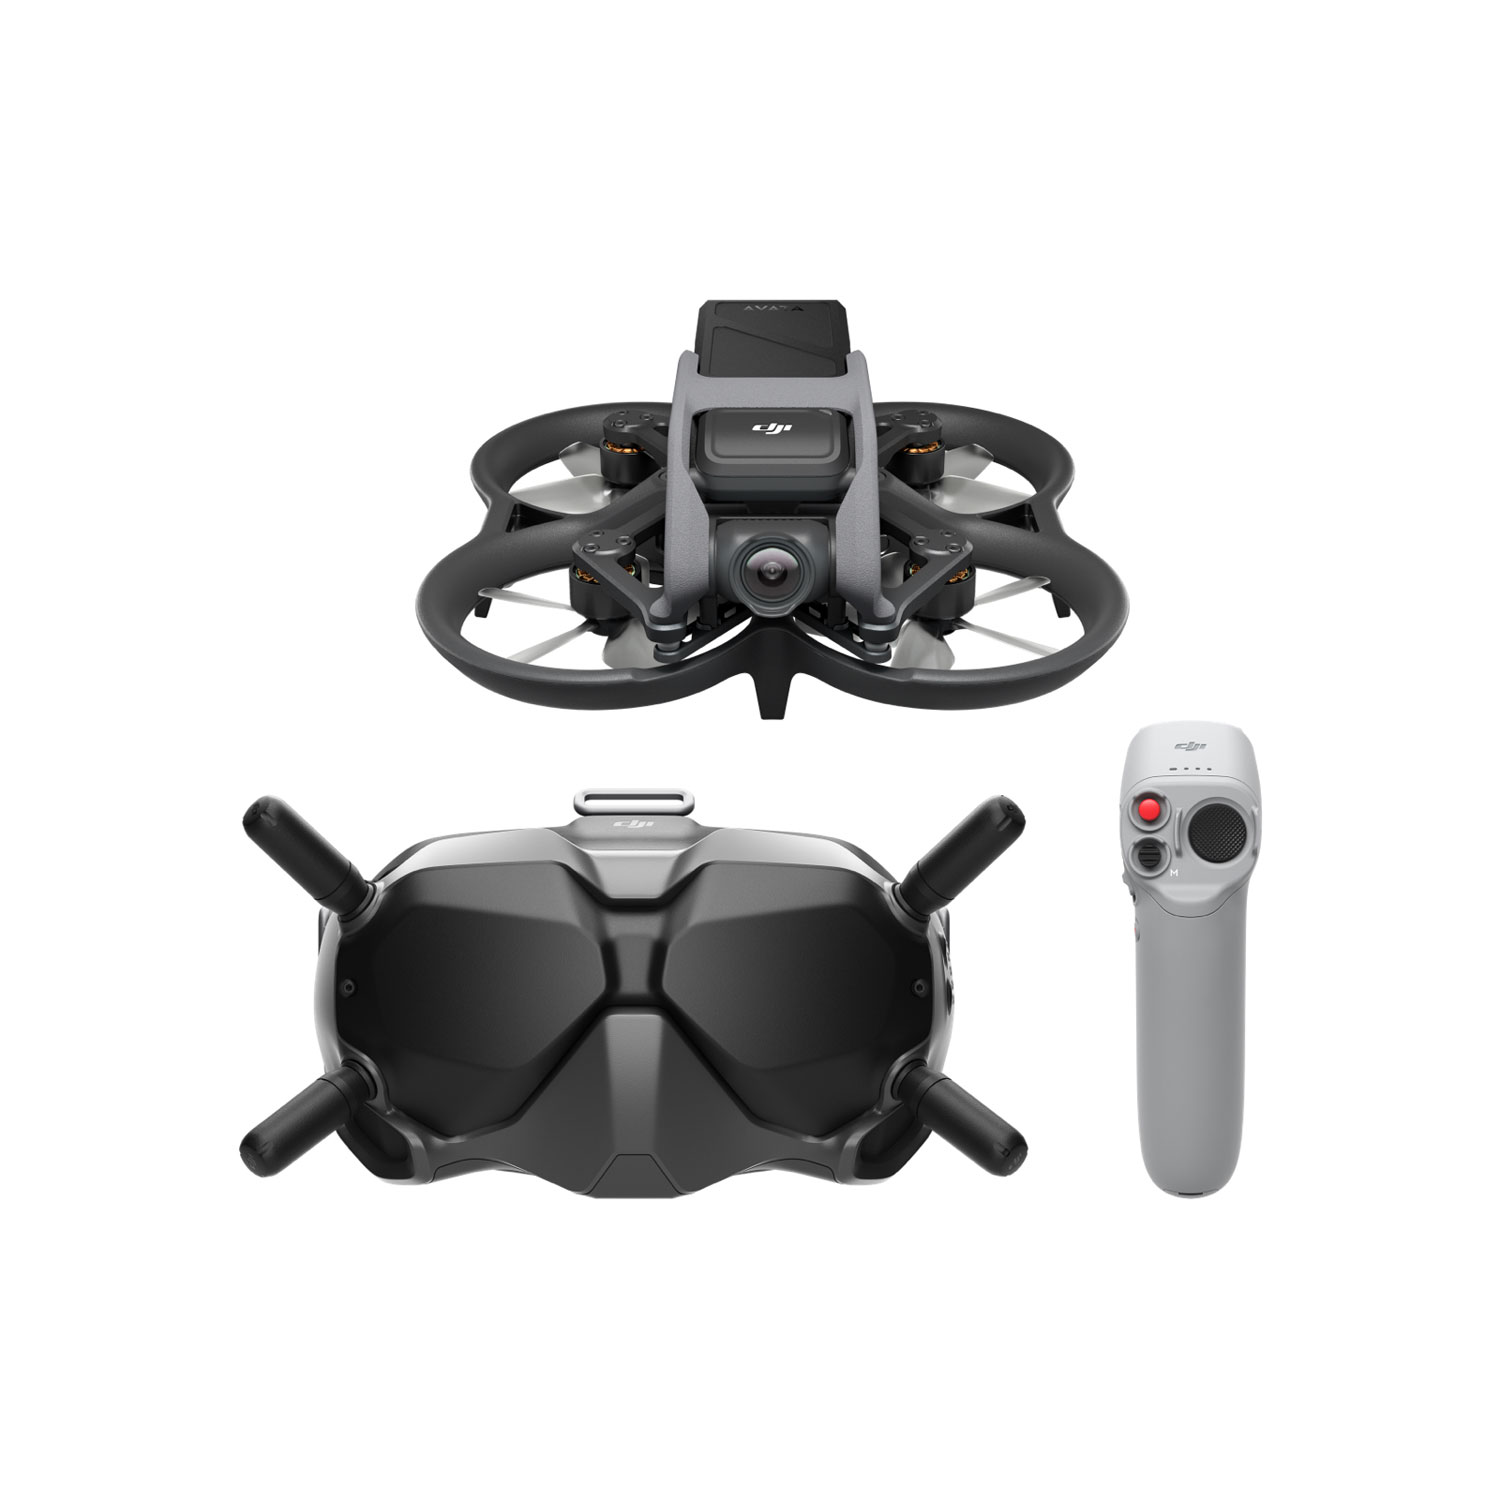 DJI Avata Quadcopter Drone Fly Smart Combo with Controller - Bilingual